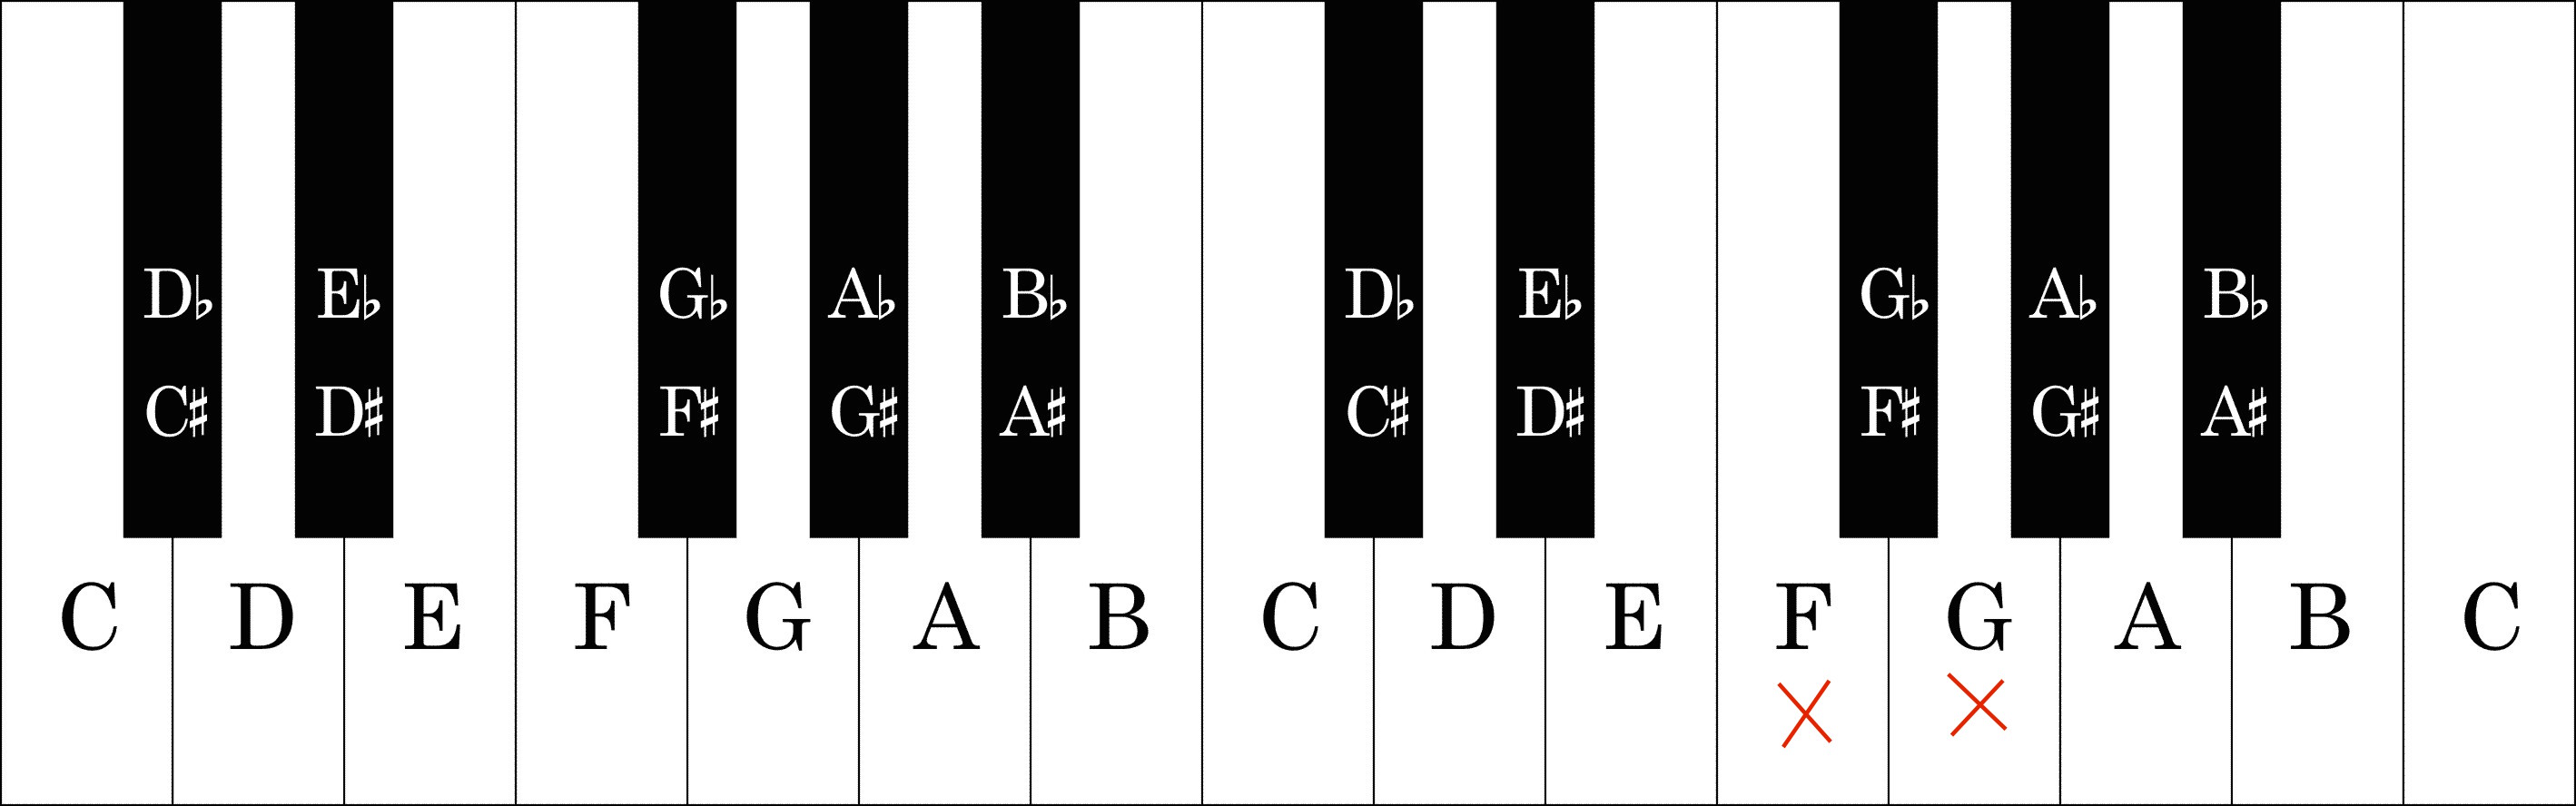 transposition chart